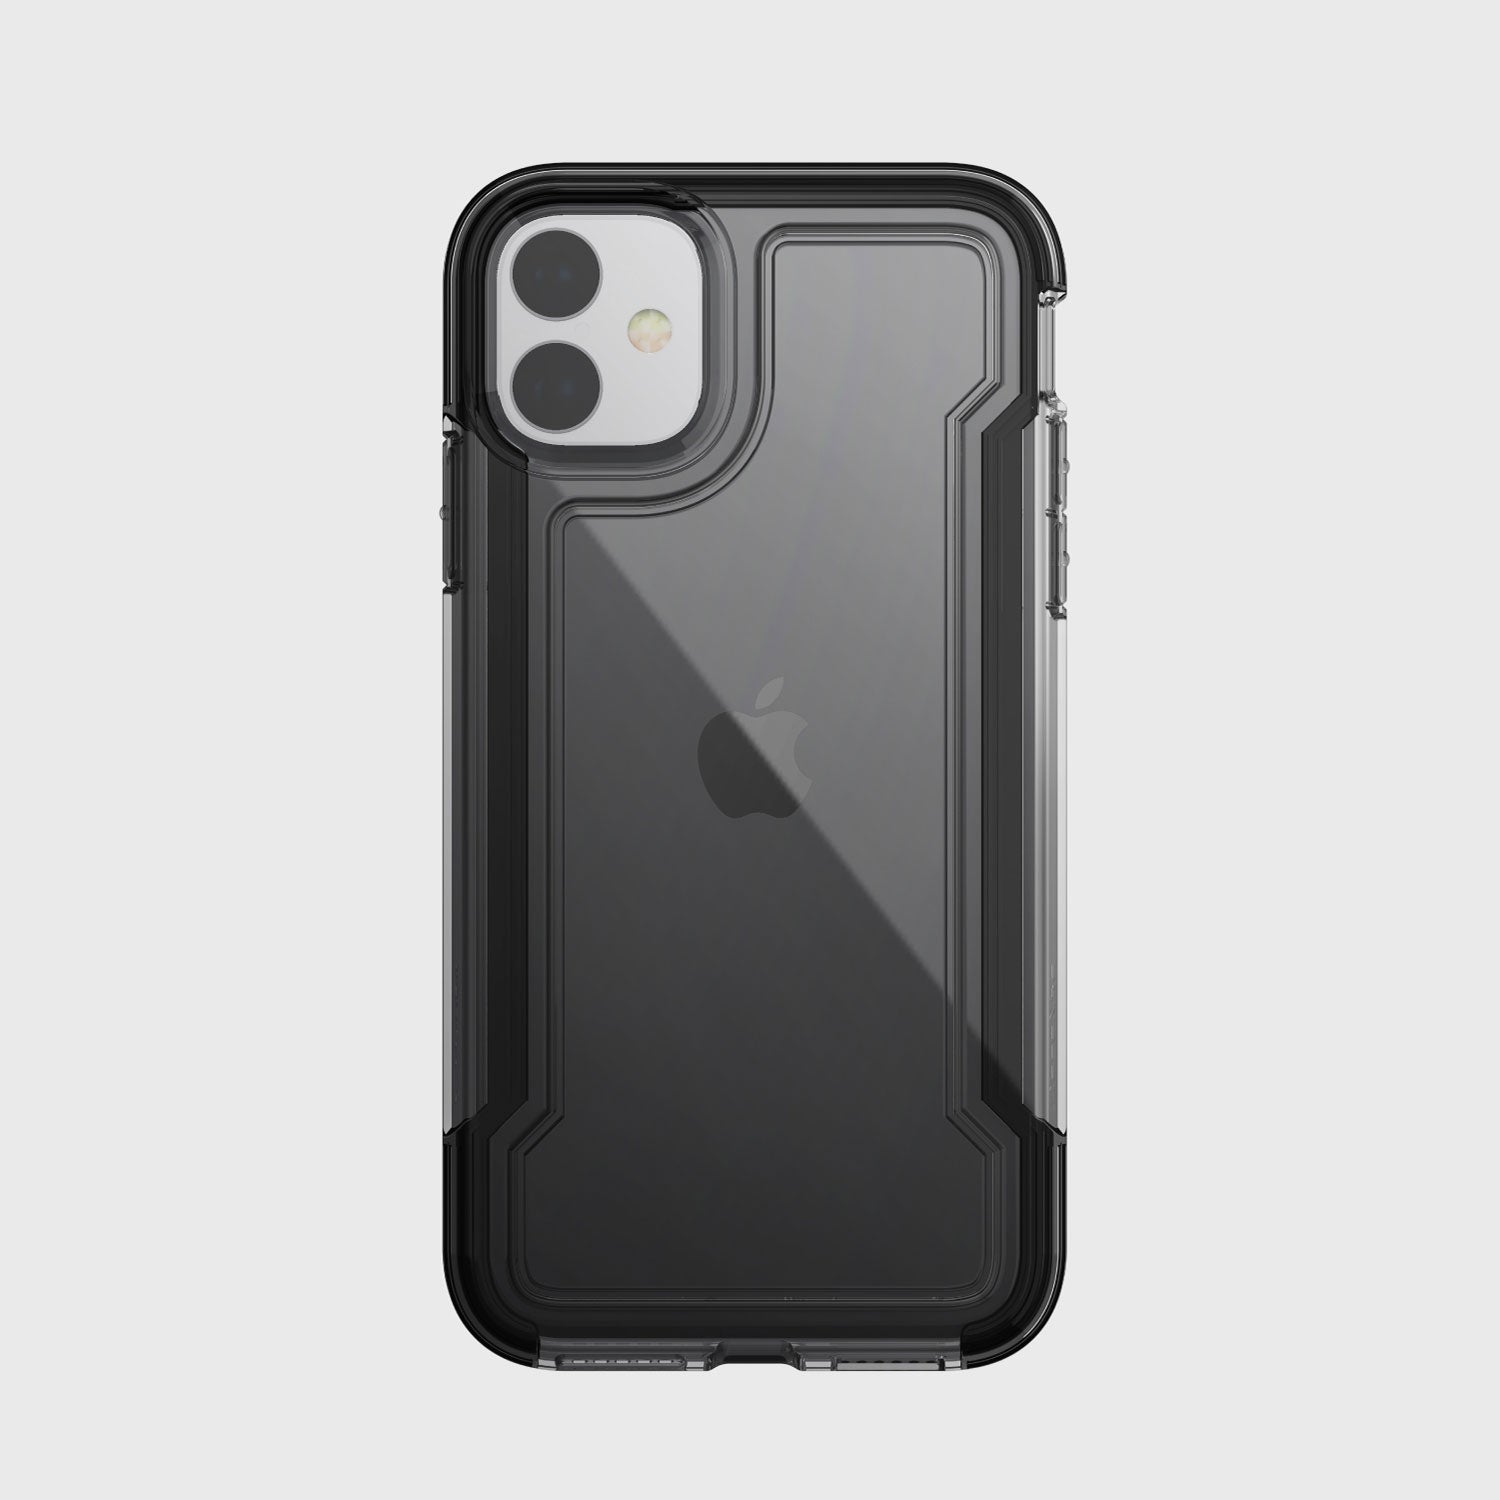 The shock-absorbing rubber of the Raptic Clear provides 2-metre drop protection for the back view of an iPhone 11 Case - CLEAR.